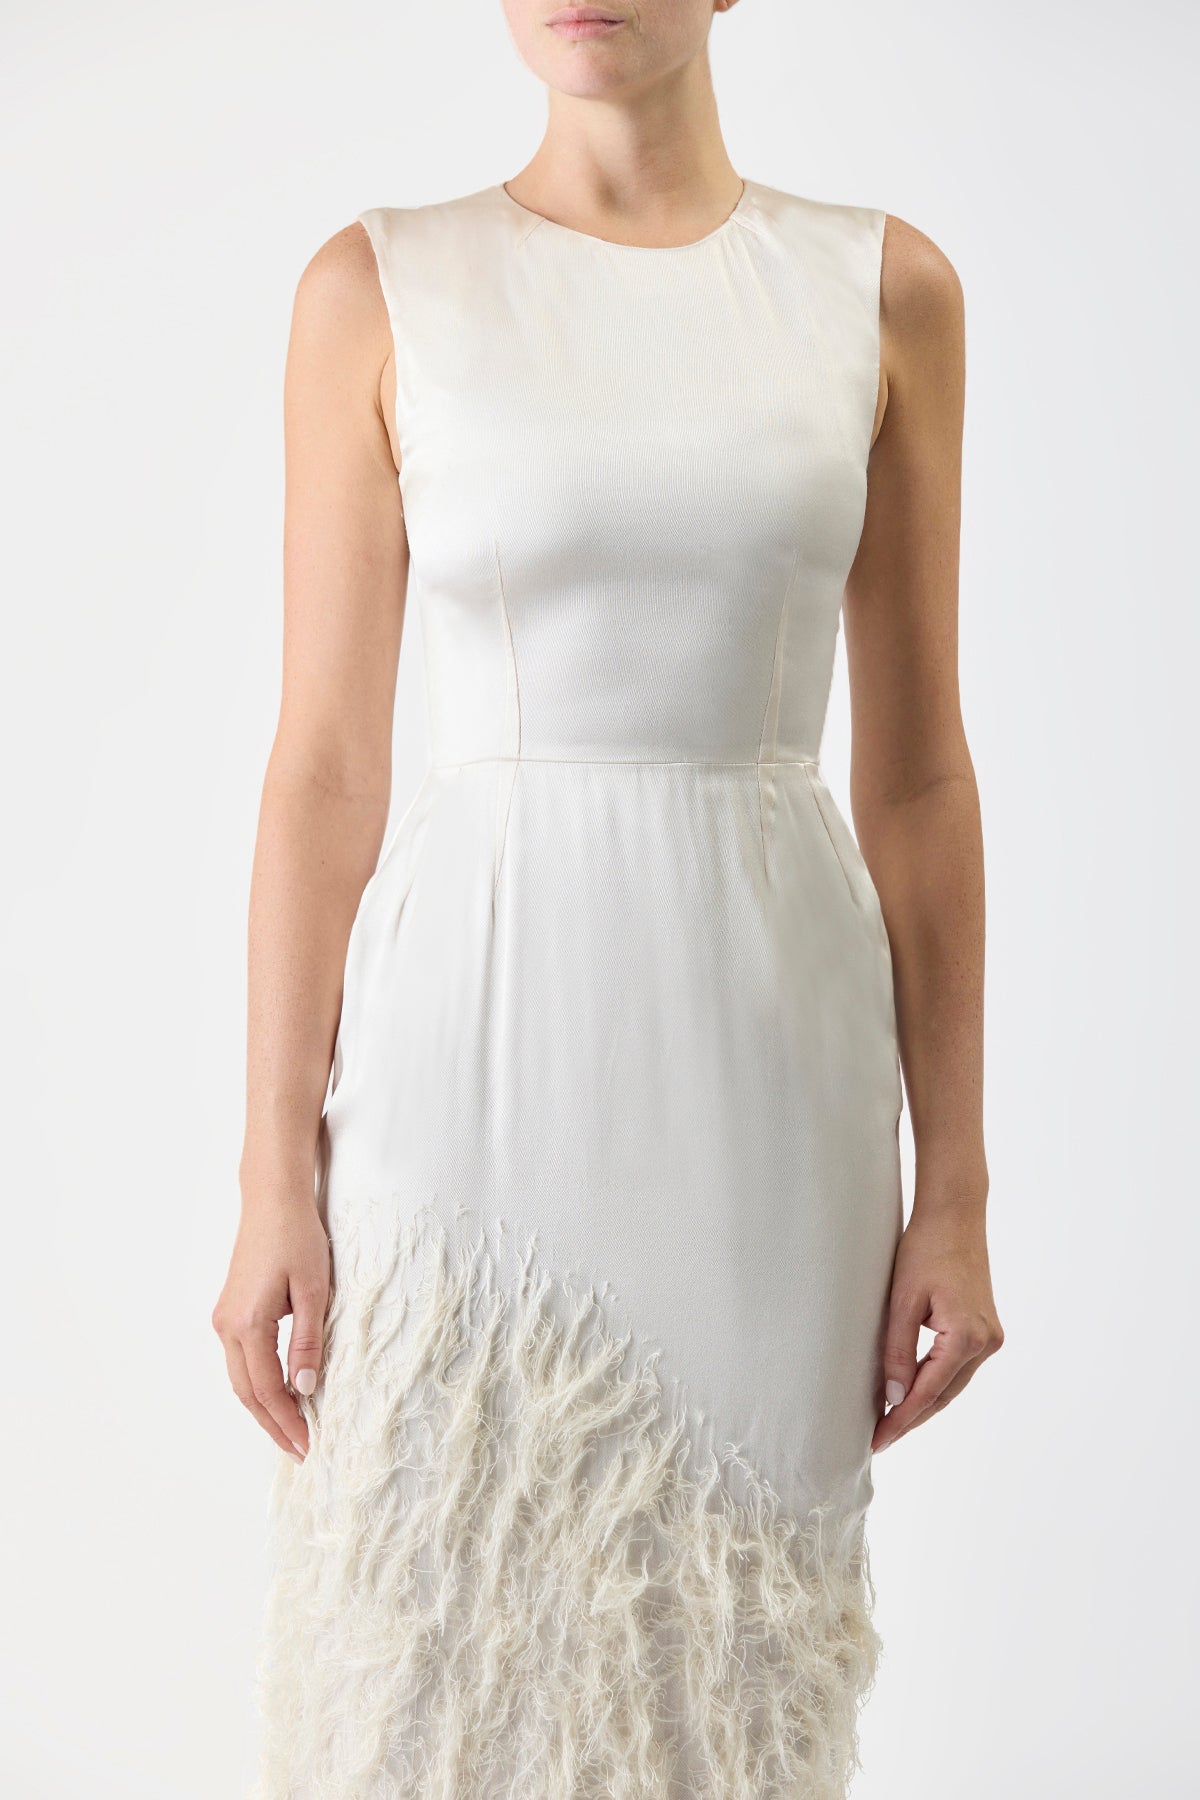 Maslow Feather Dress in Ivory Silk Satin